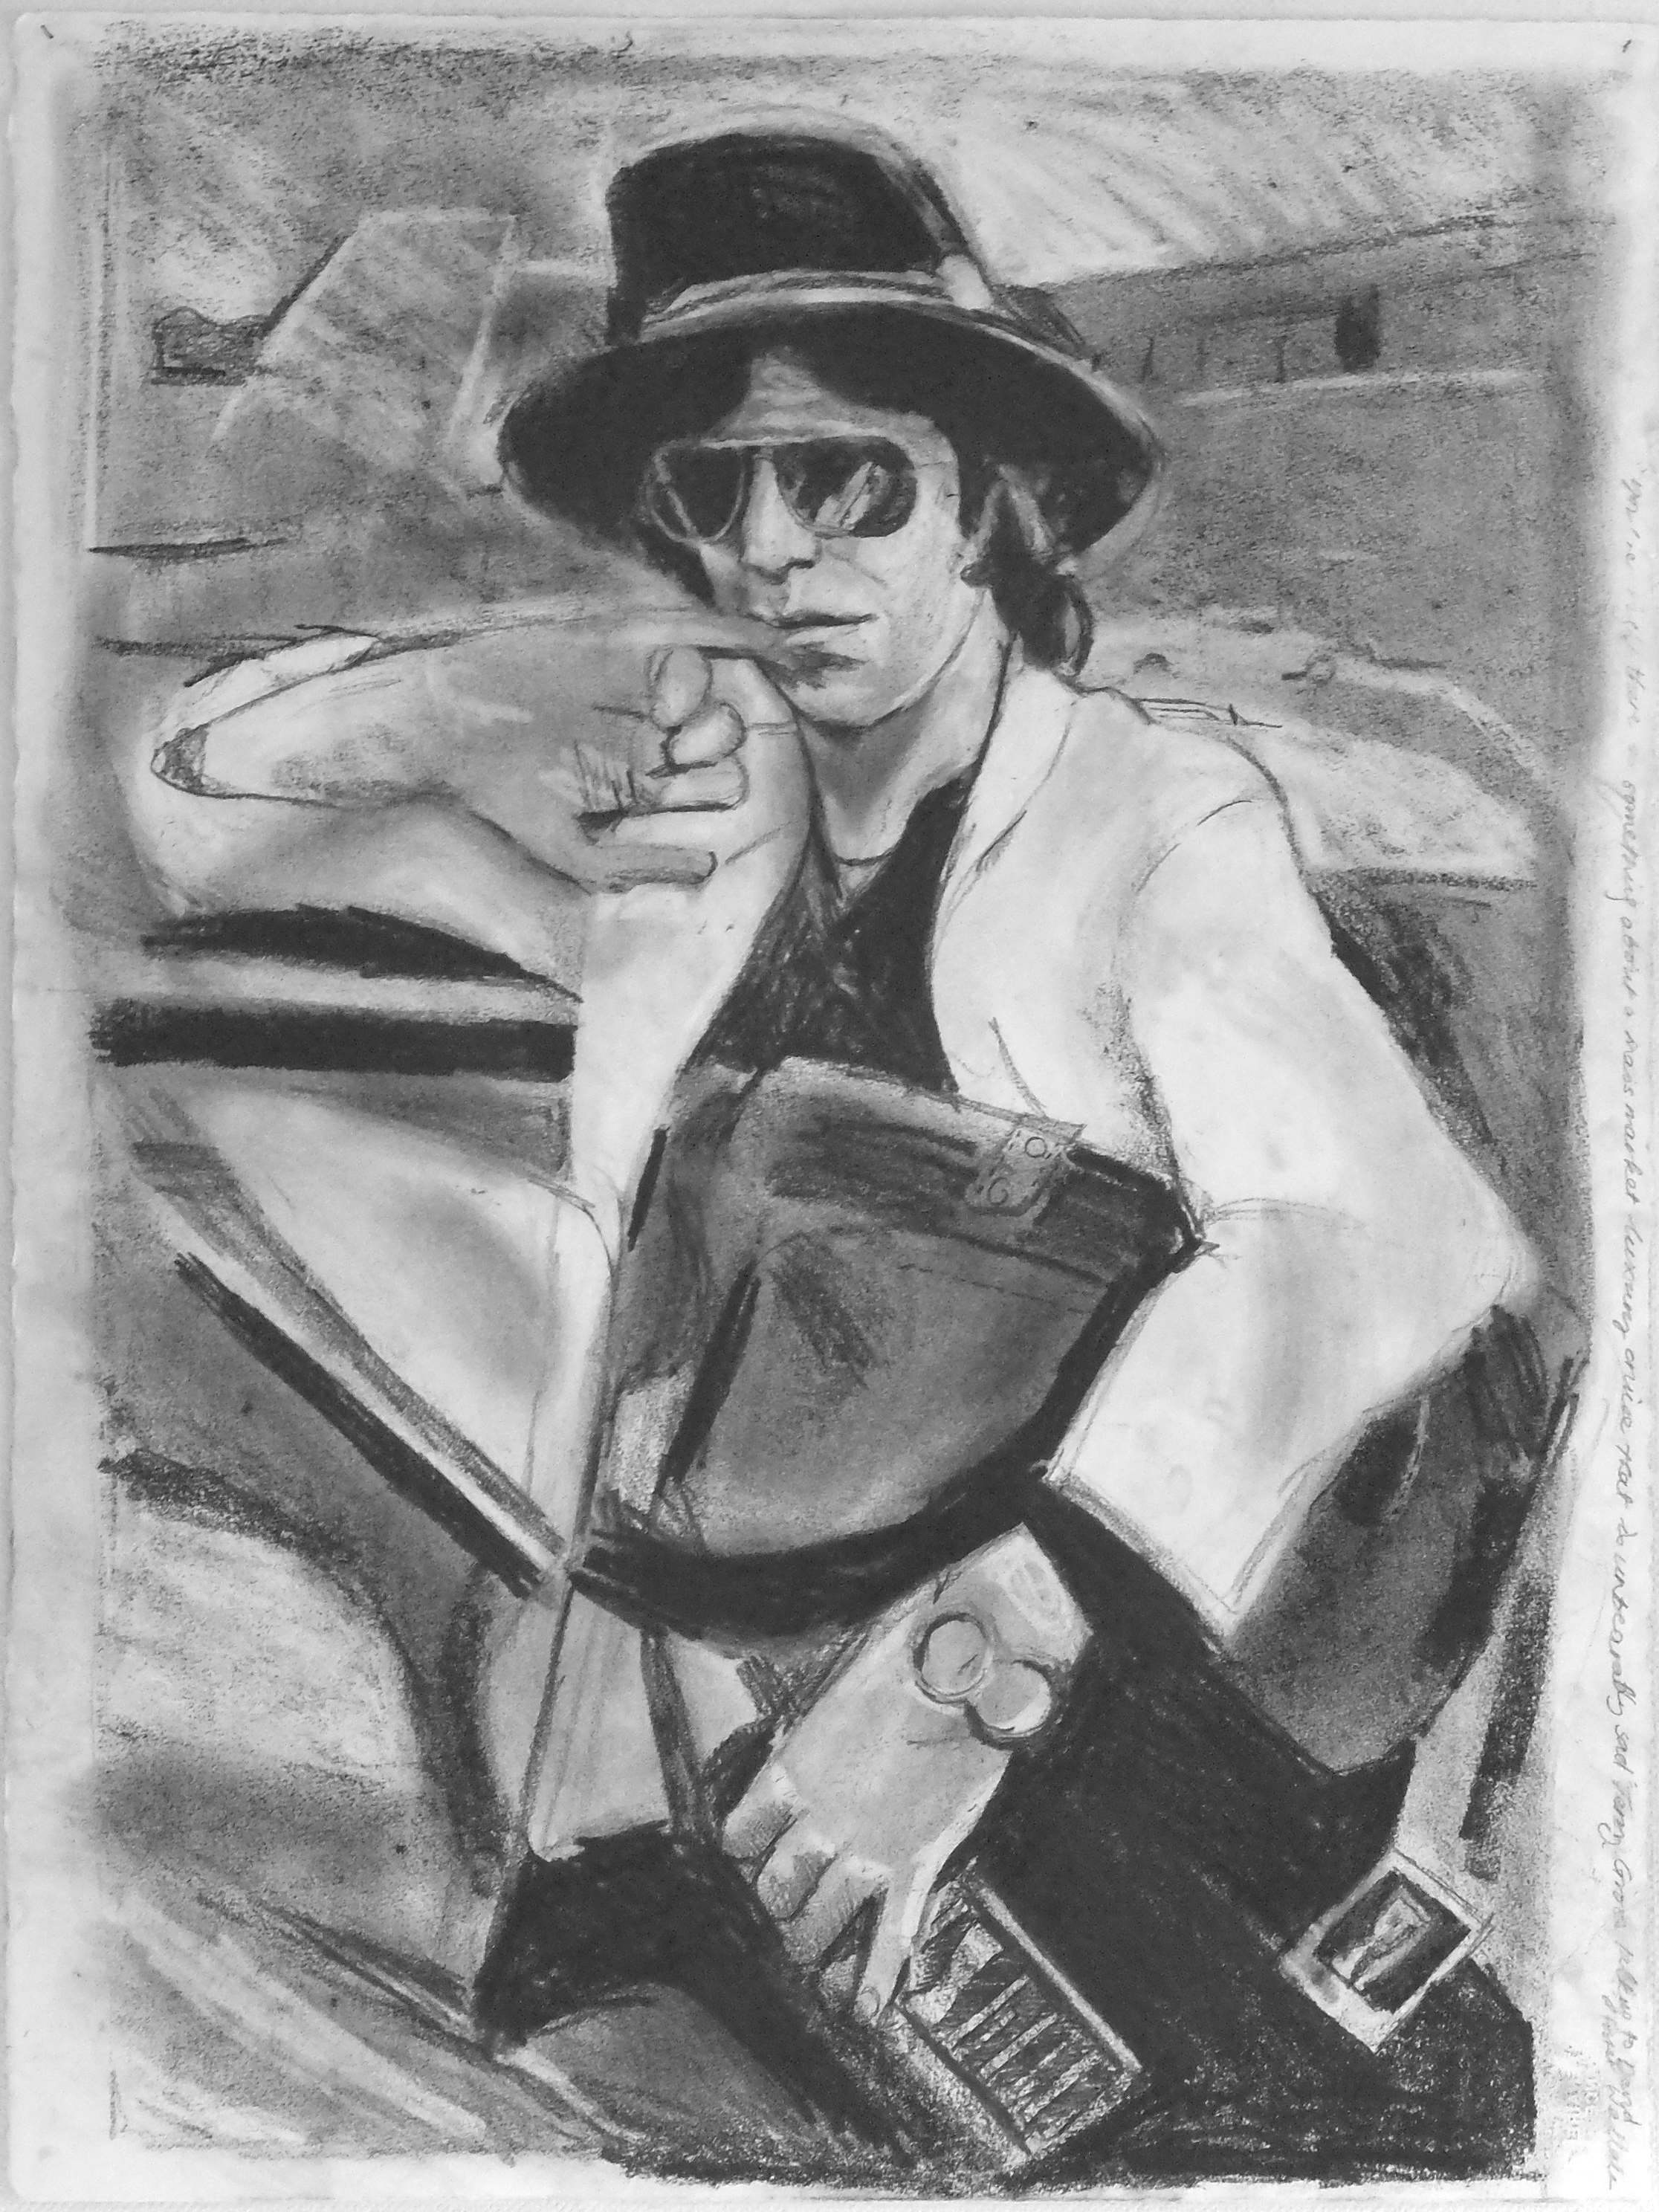 Keith at the airport
Pencil on paper 
57 x 76 cm